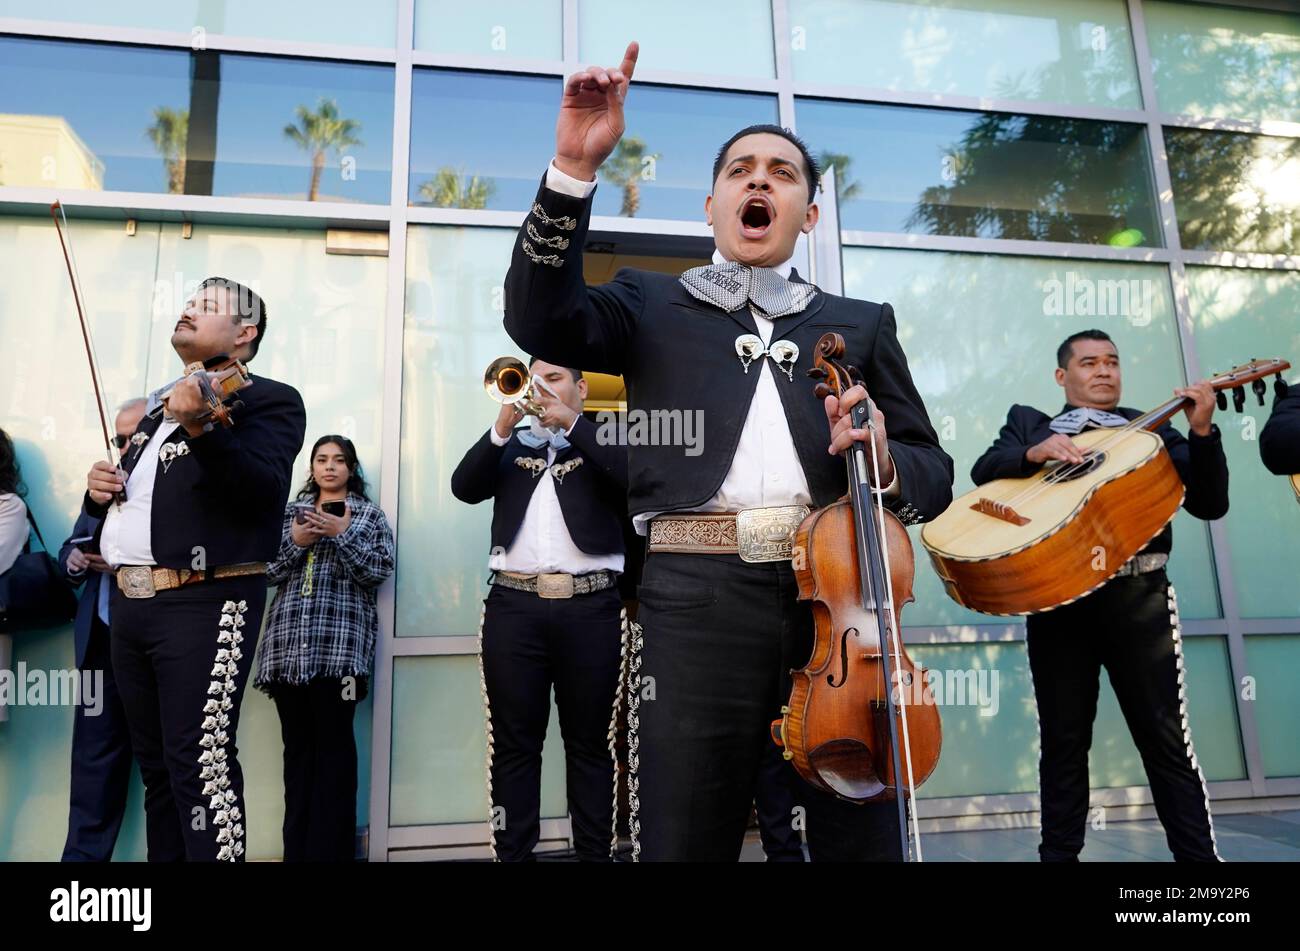 Luis Aparicio, center, of the Mariachi Los Reyes band, performs before a  ceremony to award Mexican actor/singer/radio personality Angelica Vale a  star on the Hollywood Walk of Fame, Thursday, Nov. 10, 2022